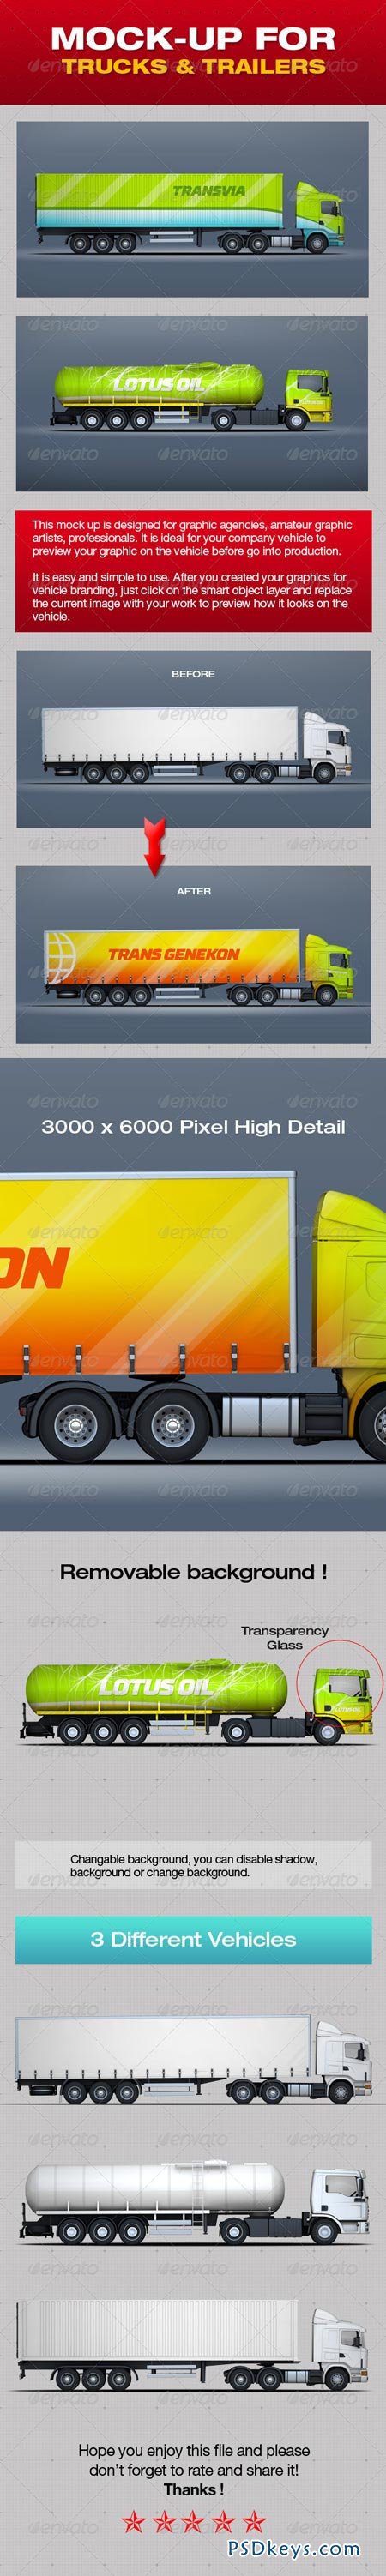 Mock-Up For Trucks & Trailers 5338232